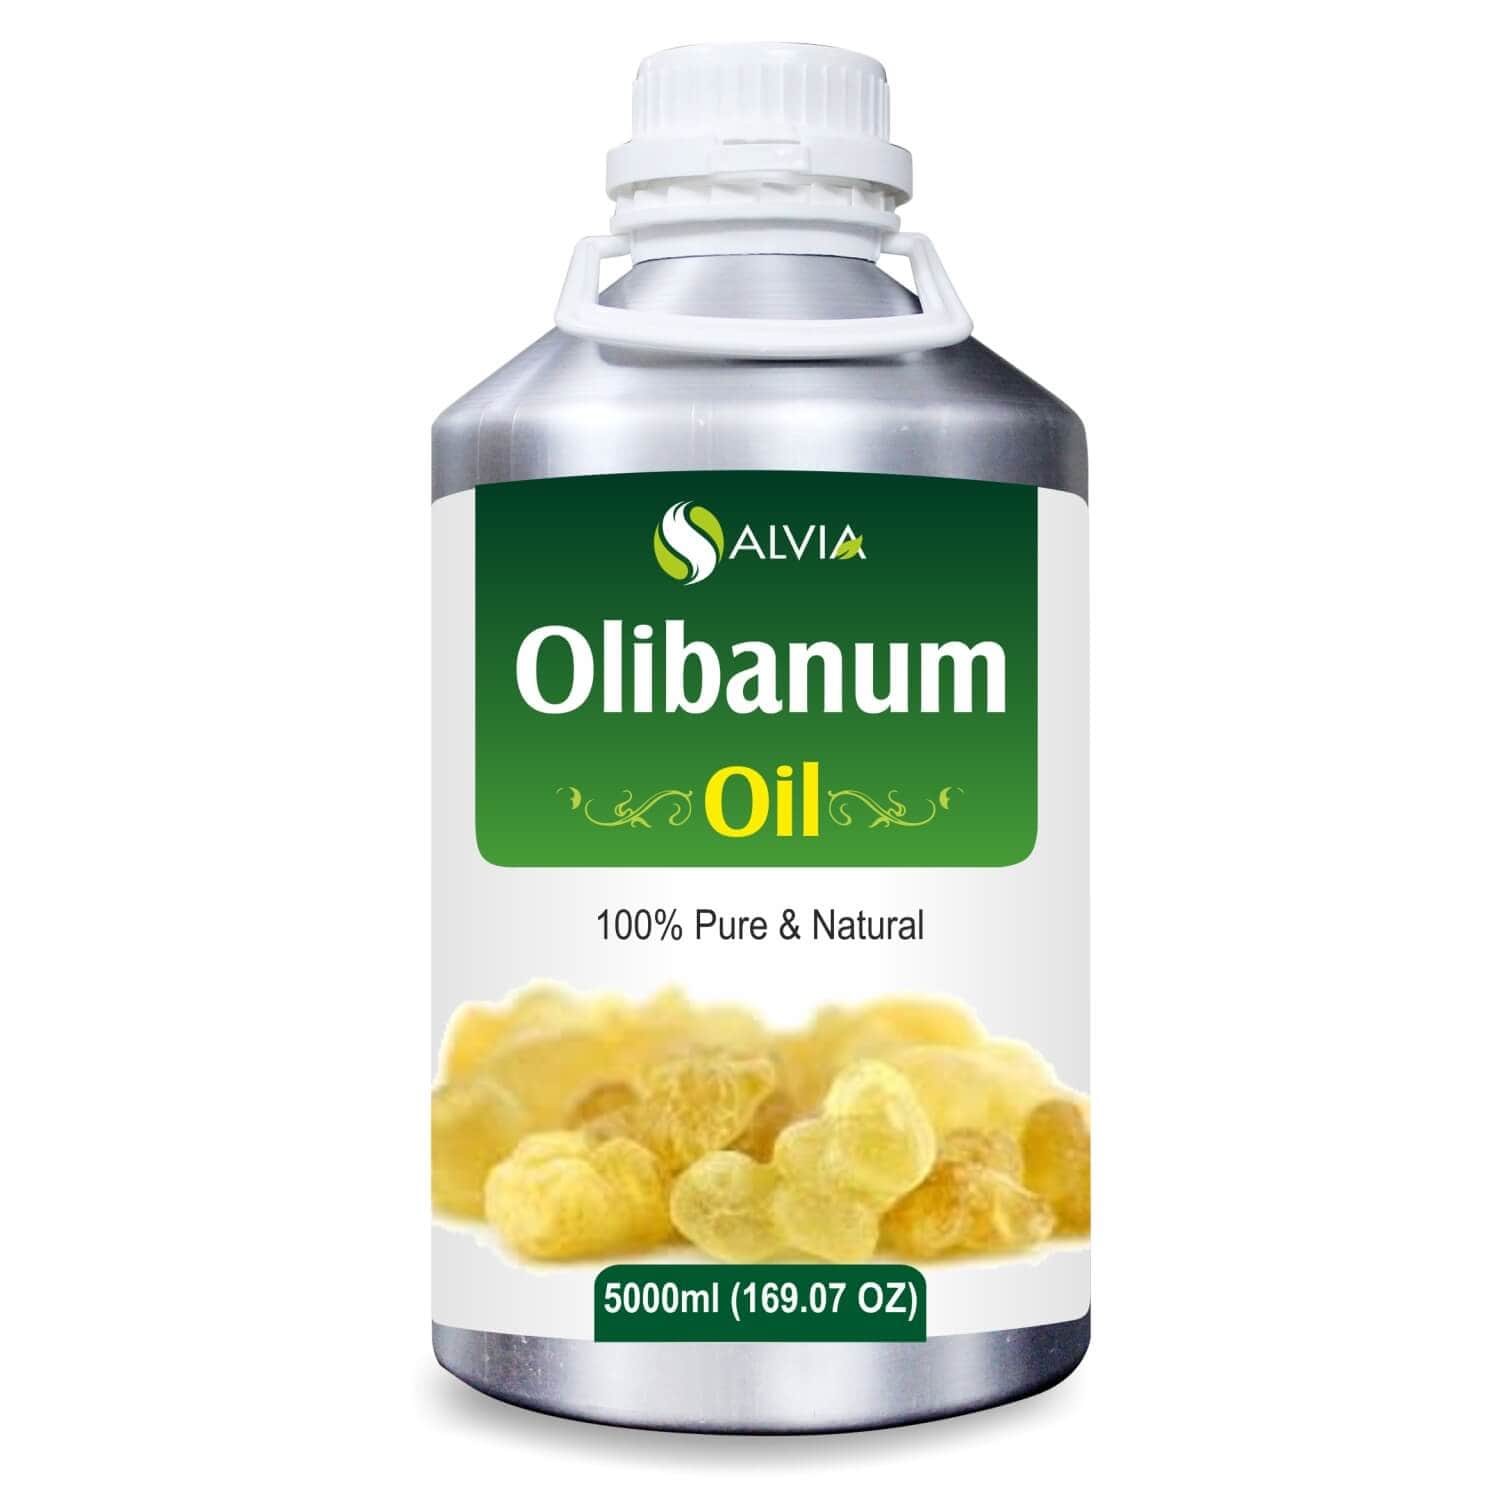 Salvia Natural Essential Oils 5000ml Olibanum Oil (Boswellia Serrata) 100% Pure Natural Essential Oil Soothes Chapped Skin, Nourishes Hair, Aromatherapy, Reduces Stretch Marks, Deals With Aging Signs